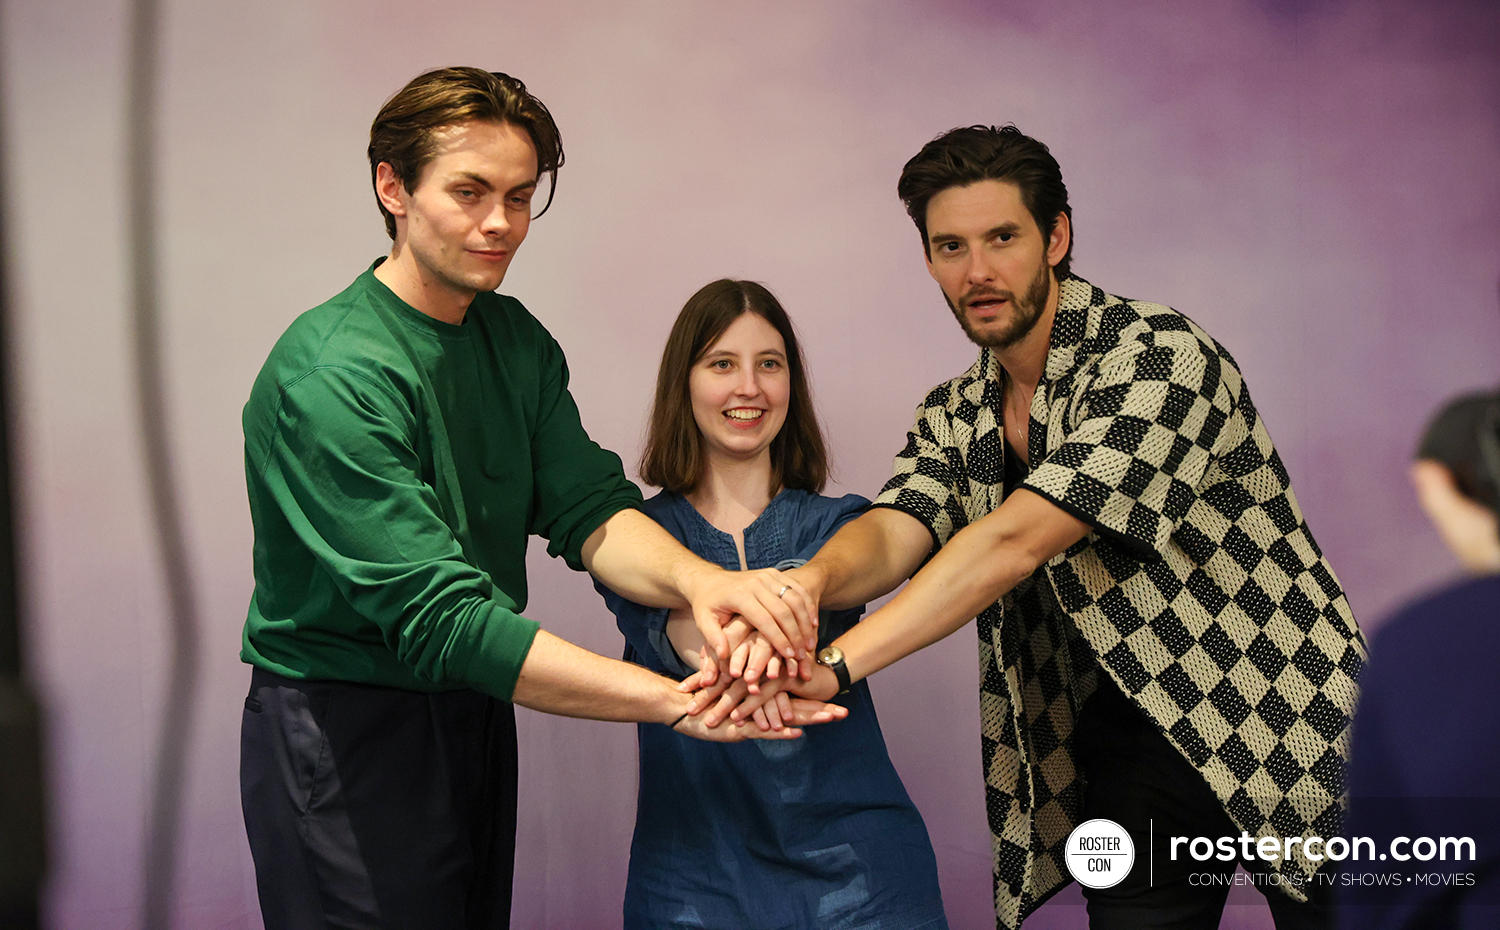 Freddy Carter & Ben Barnes - Photoshoot - A Storm of Crows and Shadows 2 - Shadow and Bone